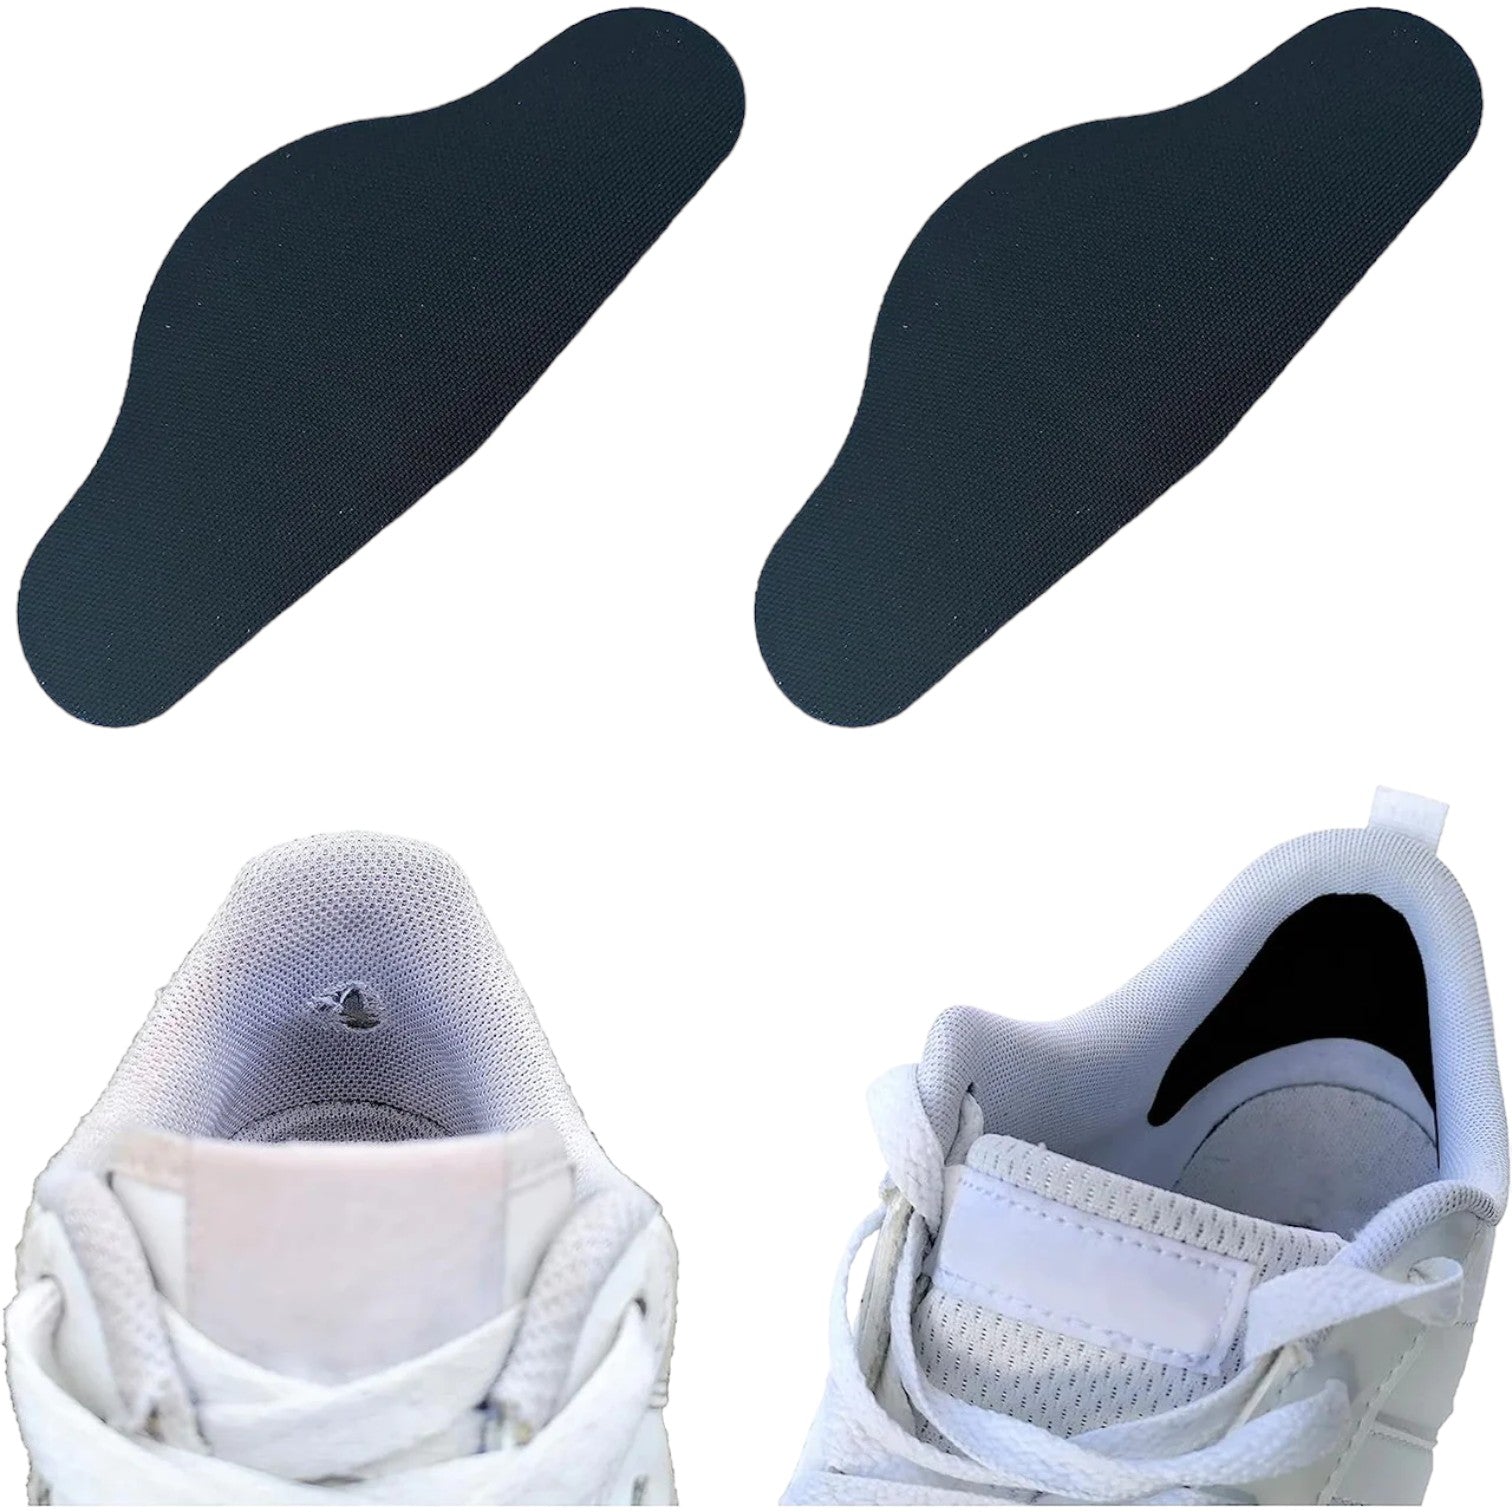 Trainer Armour Heel Hole Preventer 1 Pack